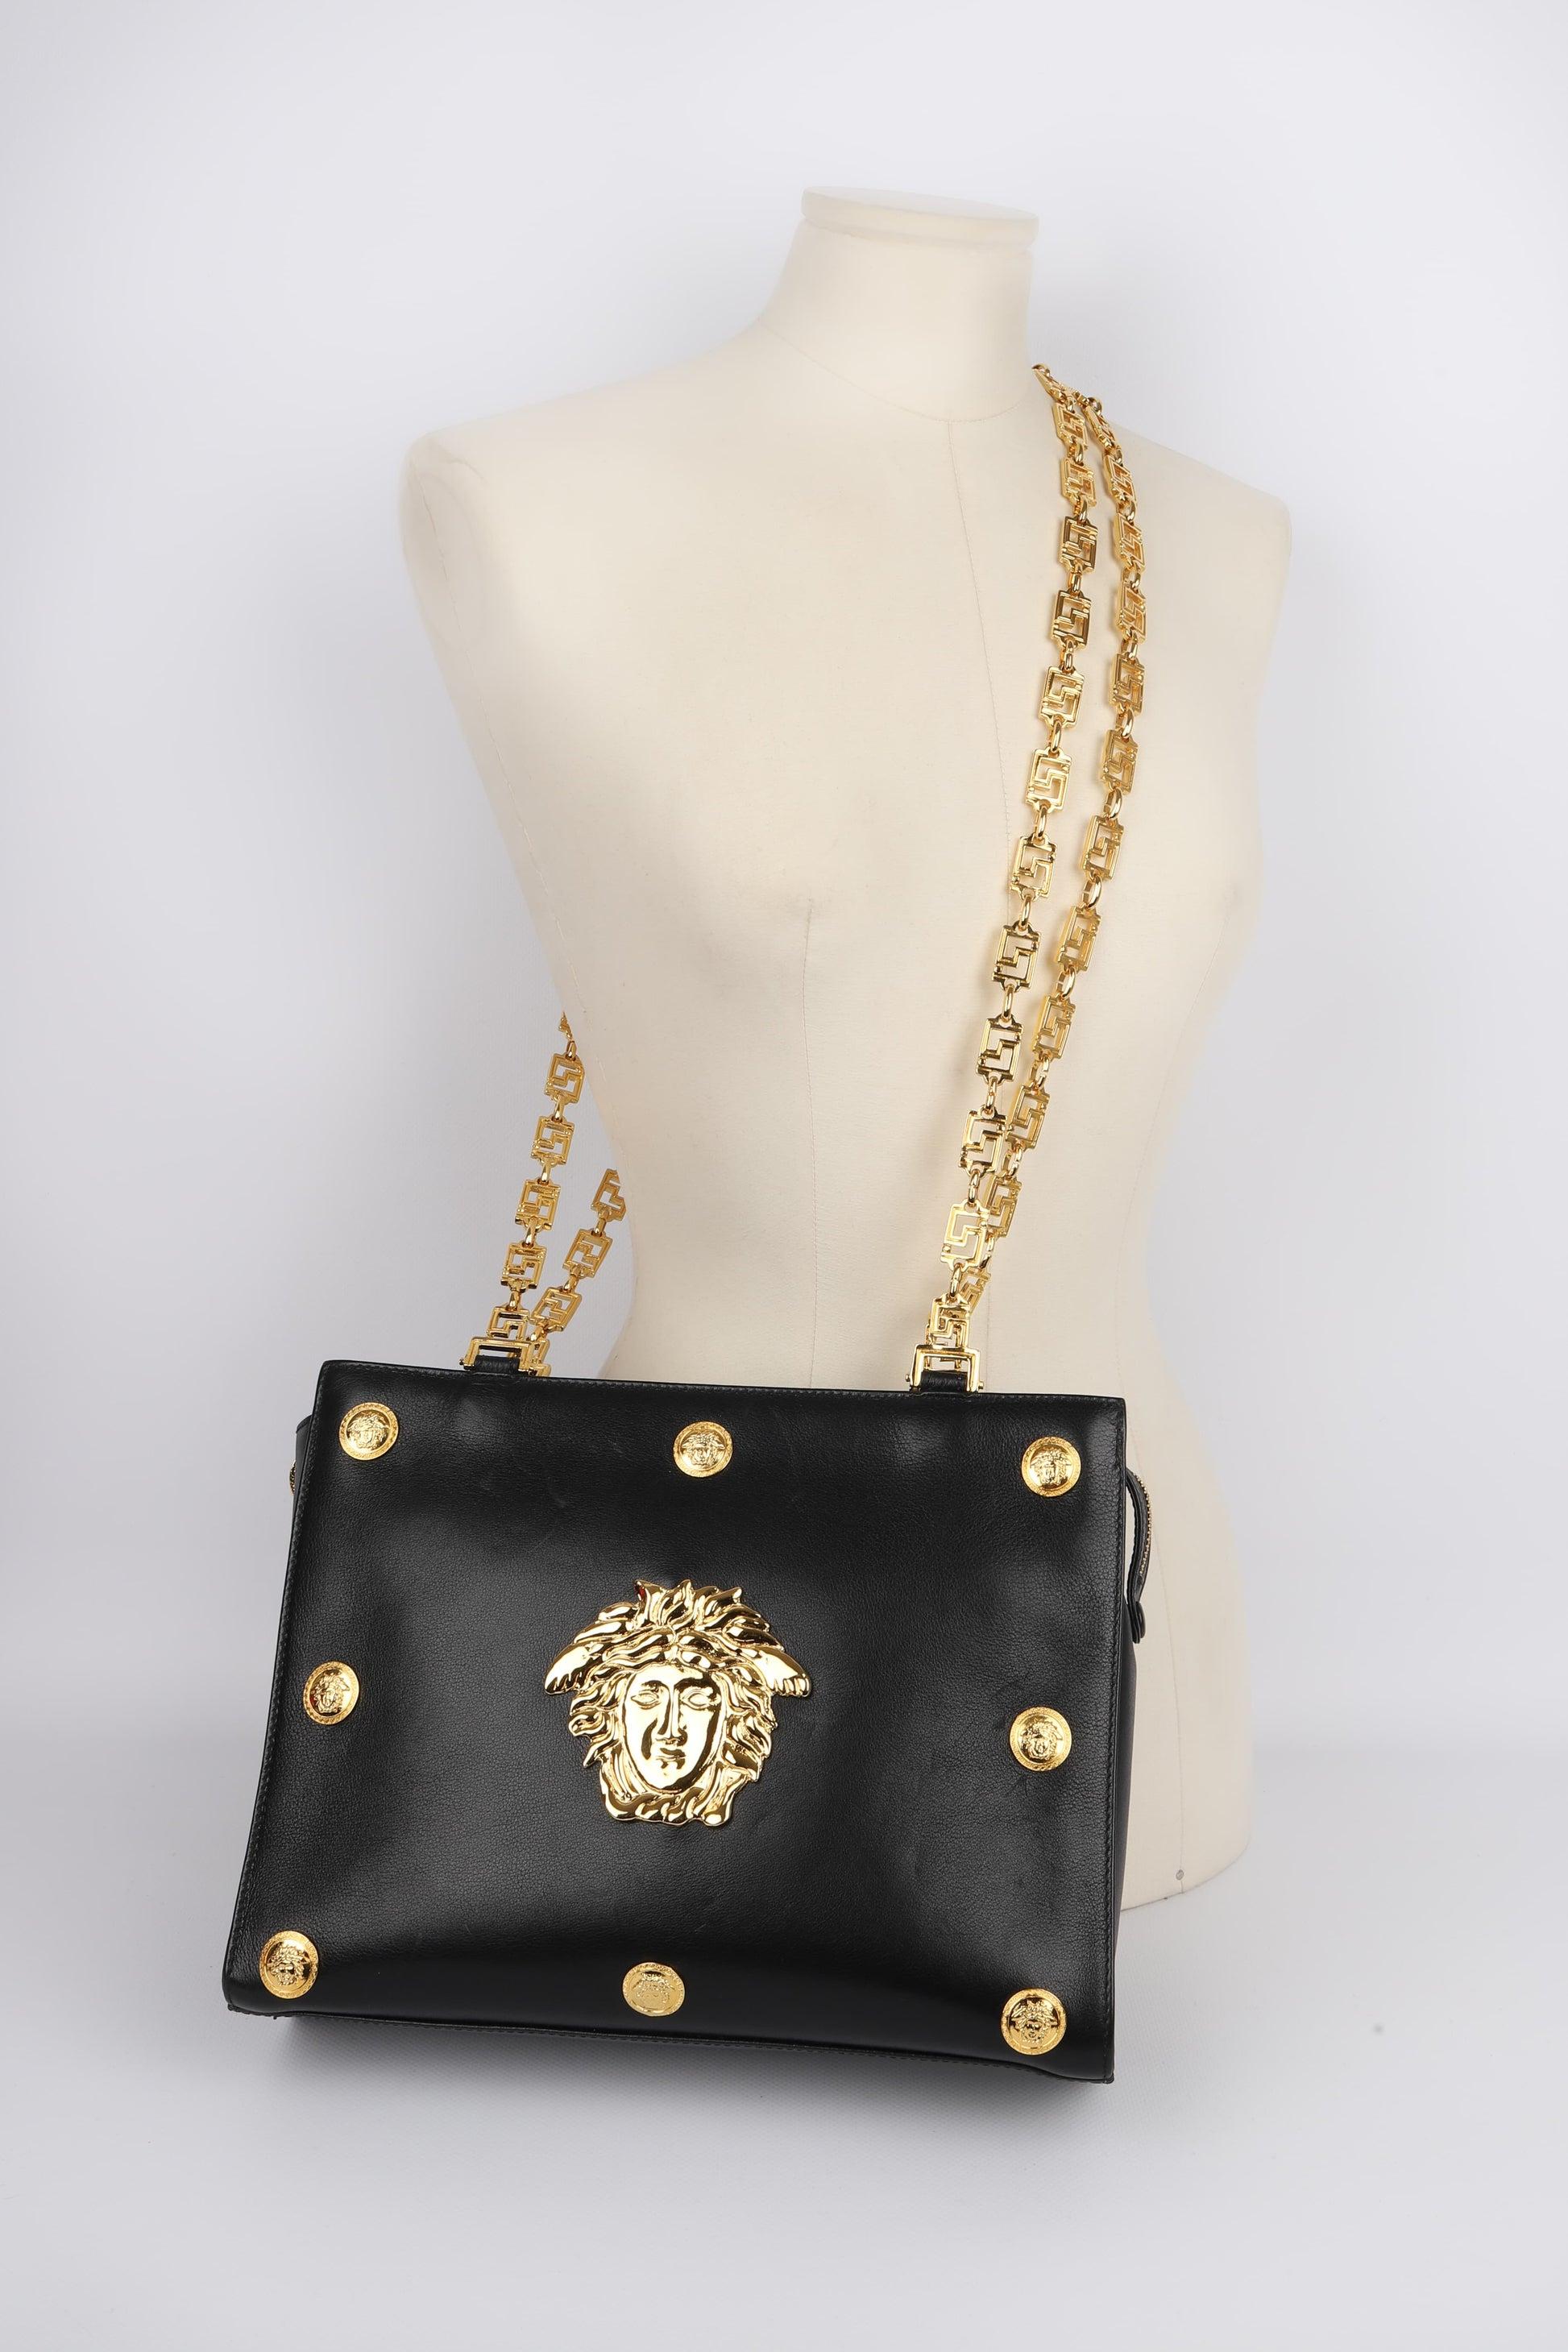 Gianni Versace Black Leather Bag with Golden Metal Elements 6